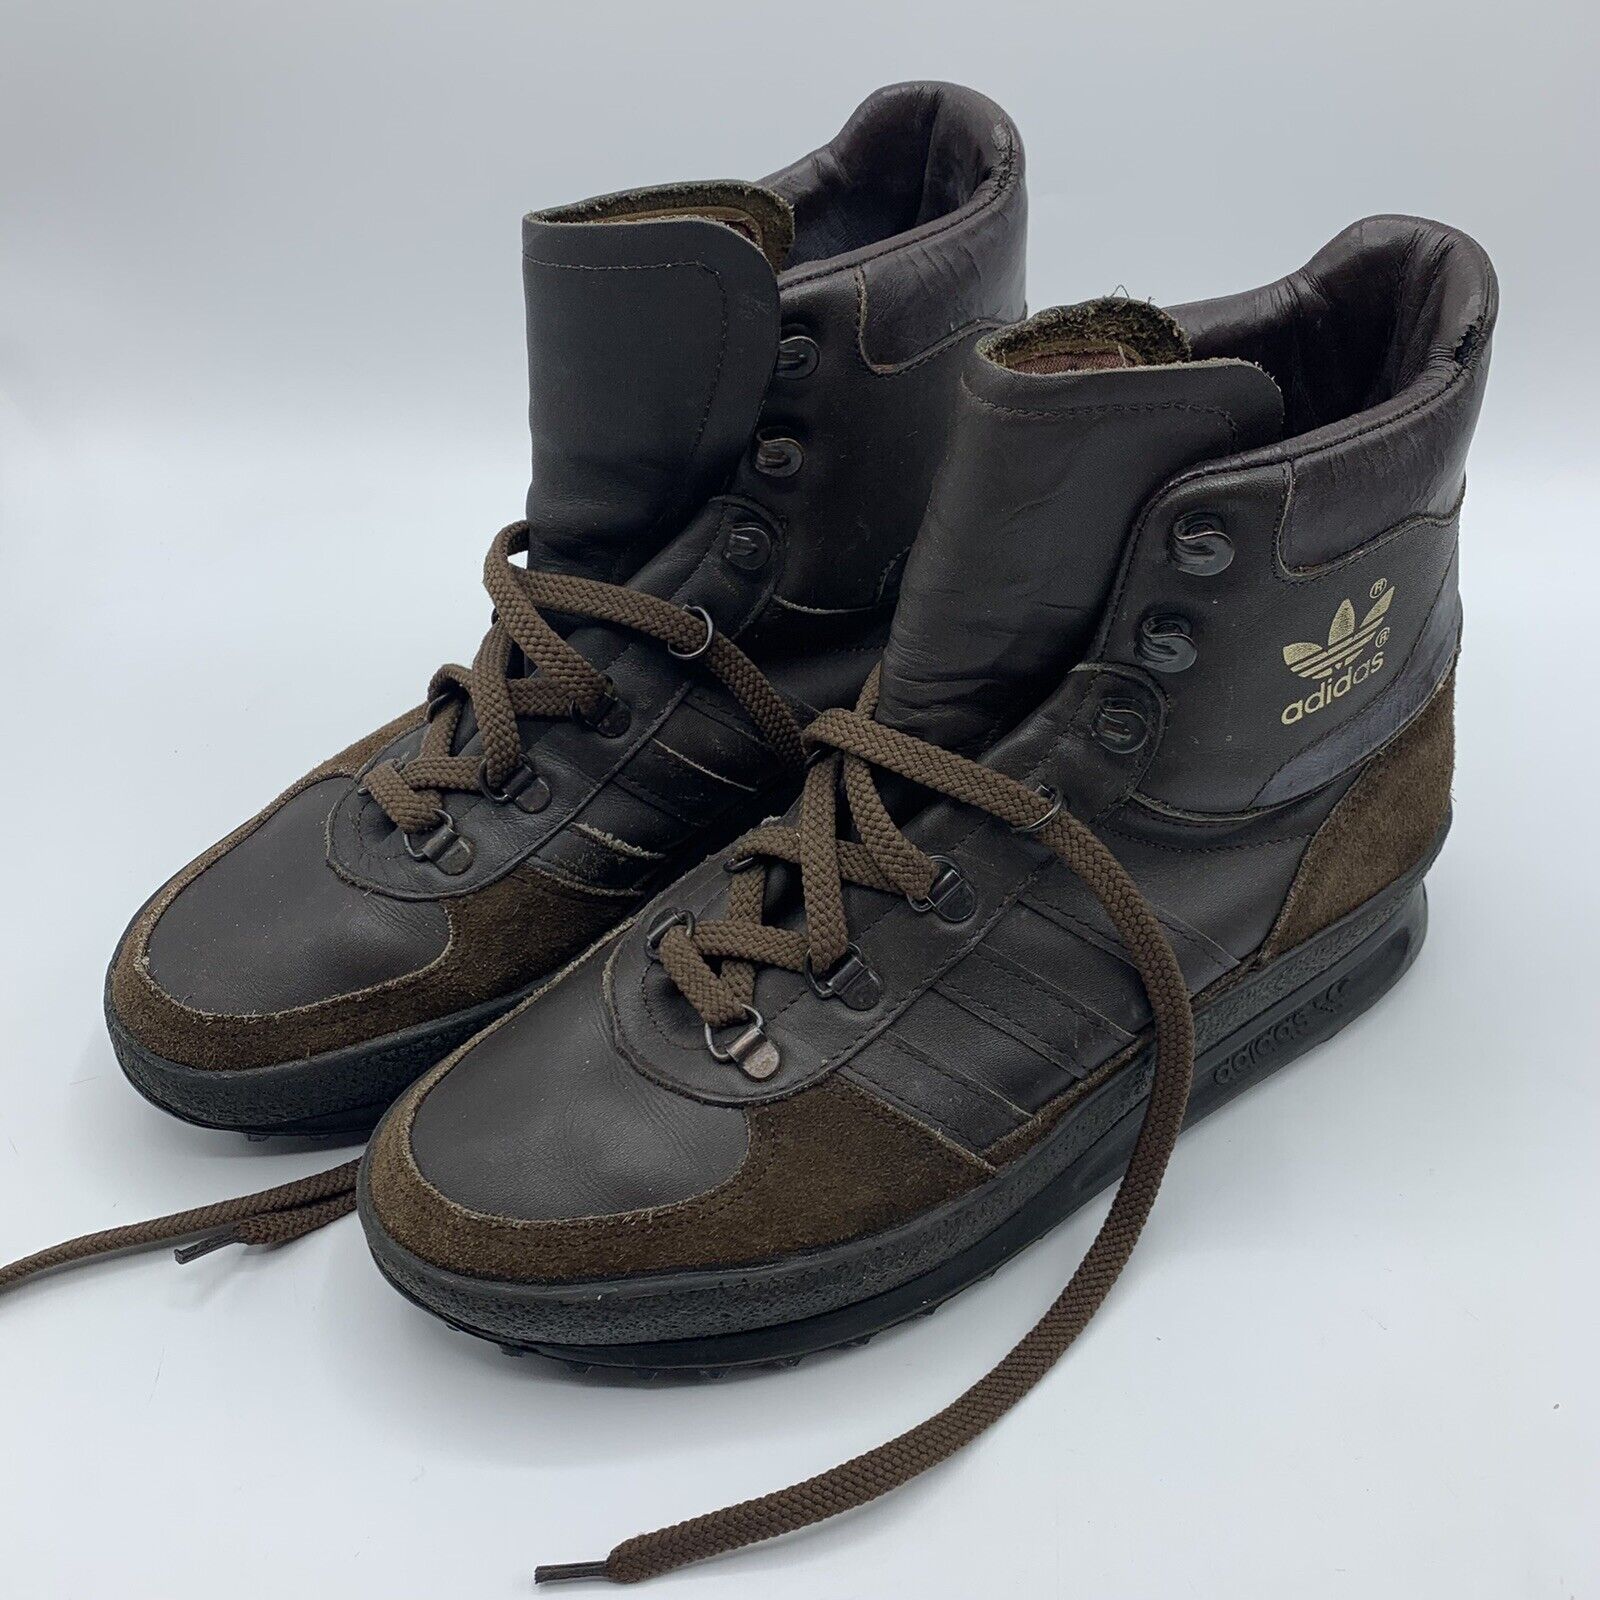 Vintage 1980s Adidas Brown Trekking Boots - Size USA 7 - Made in Yugoslavia